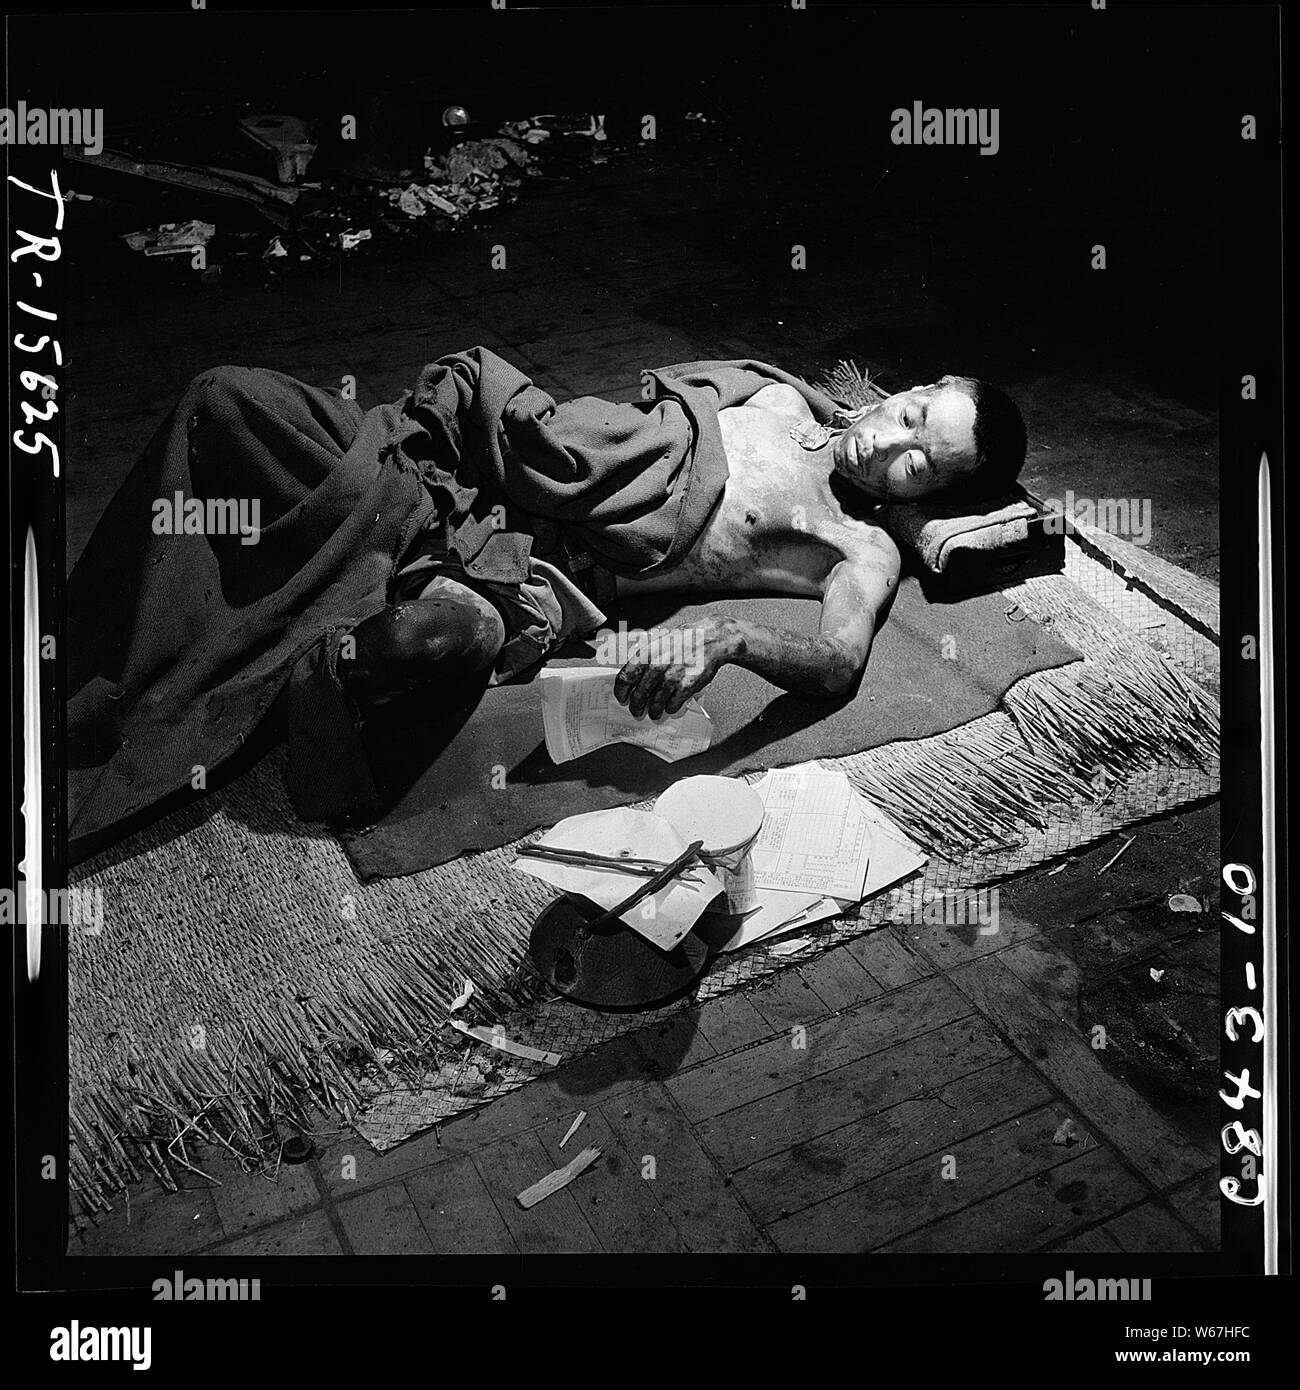 Navy photographer pictures suffering and ruins that resulted from atom bomb blast in Hiroshima, Japan. Victim lies in make-shift hospital in bank building. Stock Photo